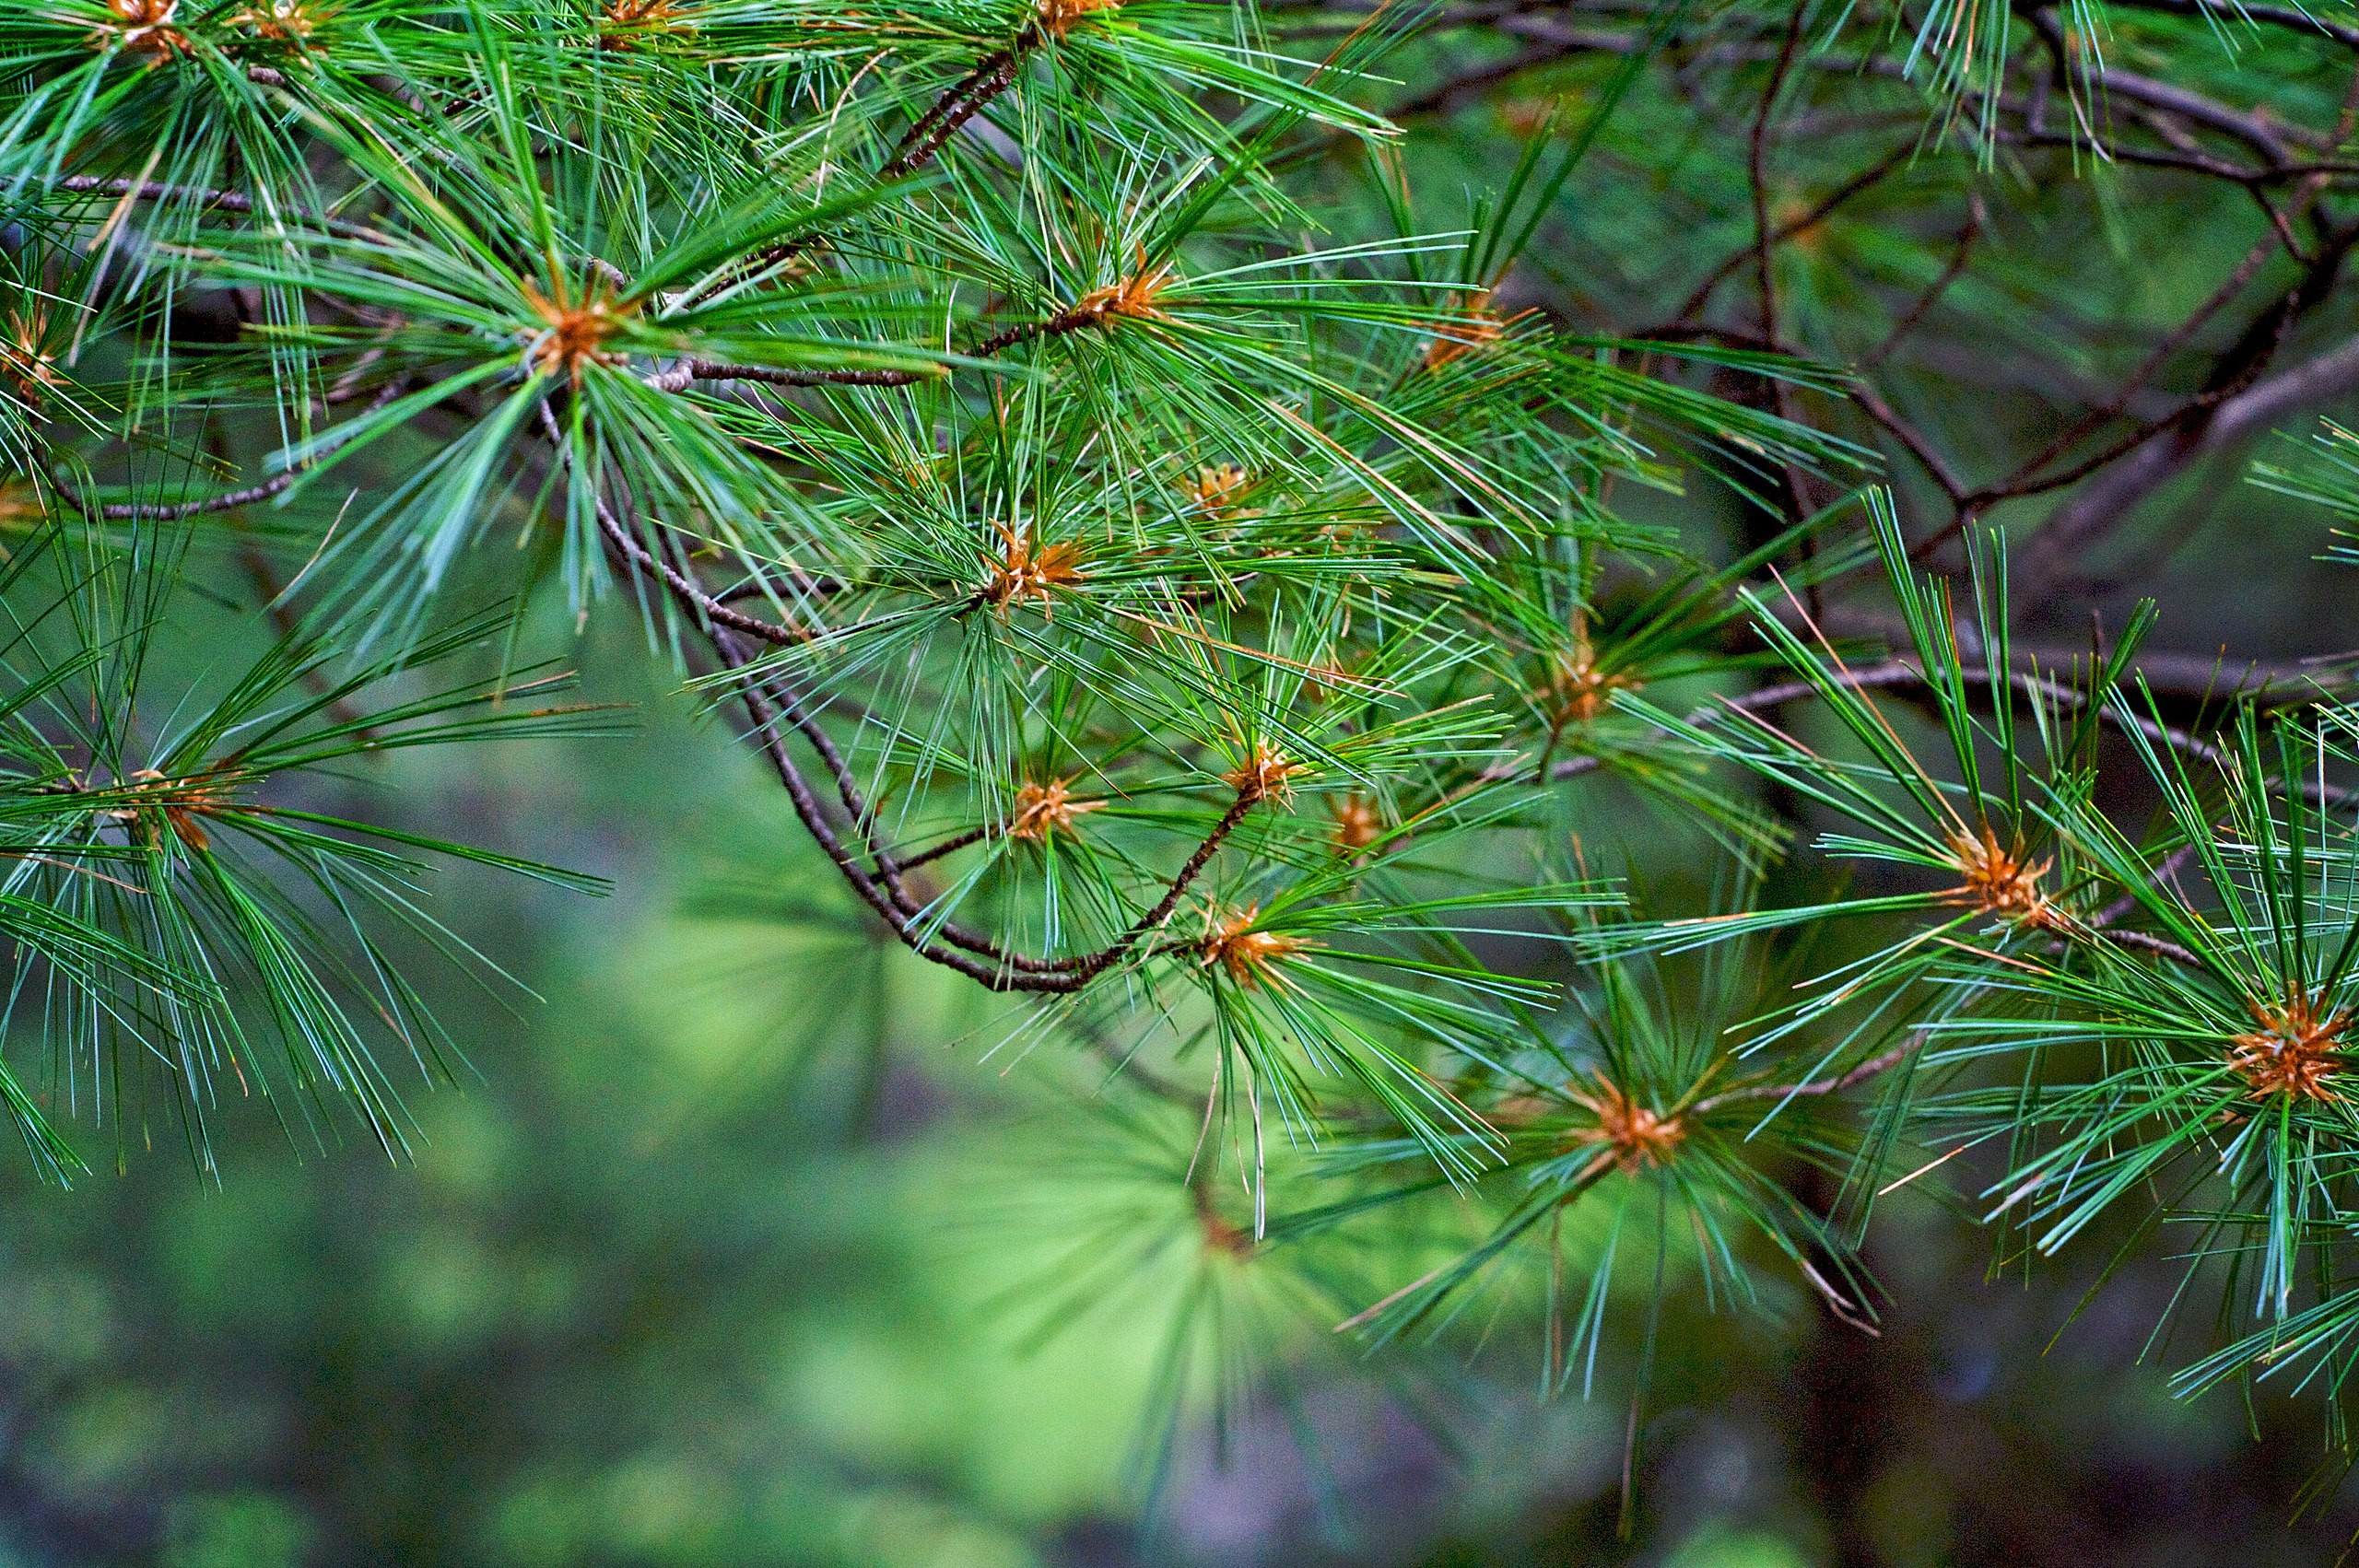 the end of a pine branch, showing long needles extending out of the branch ends